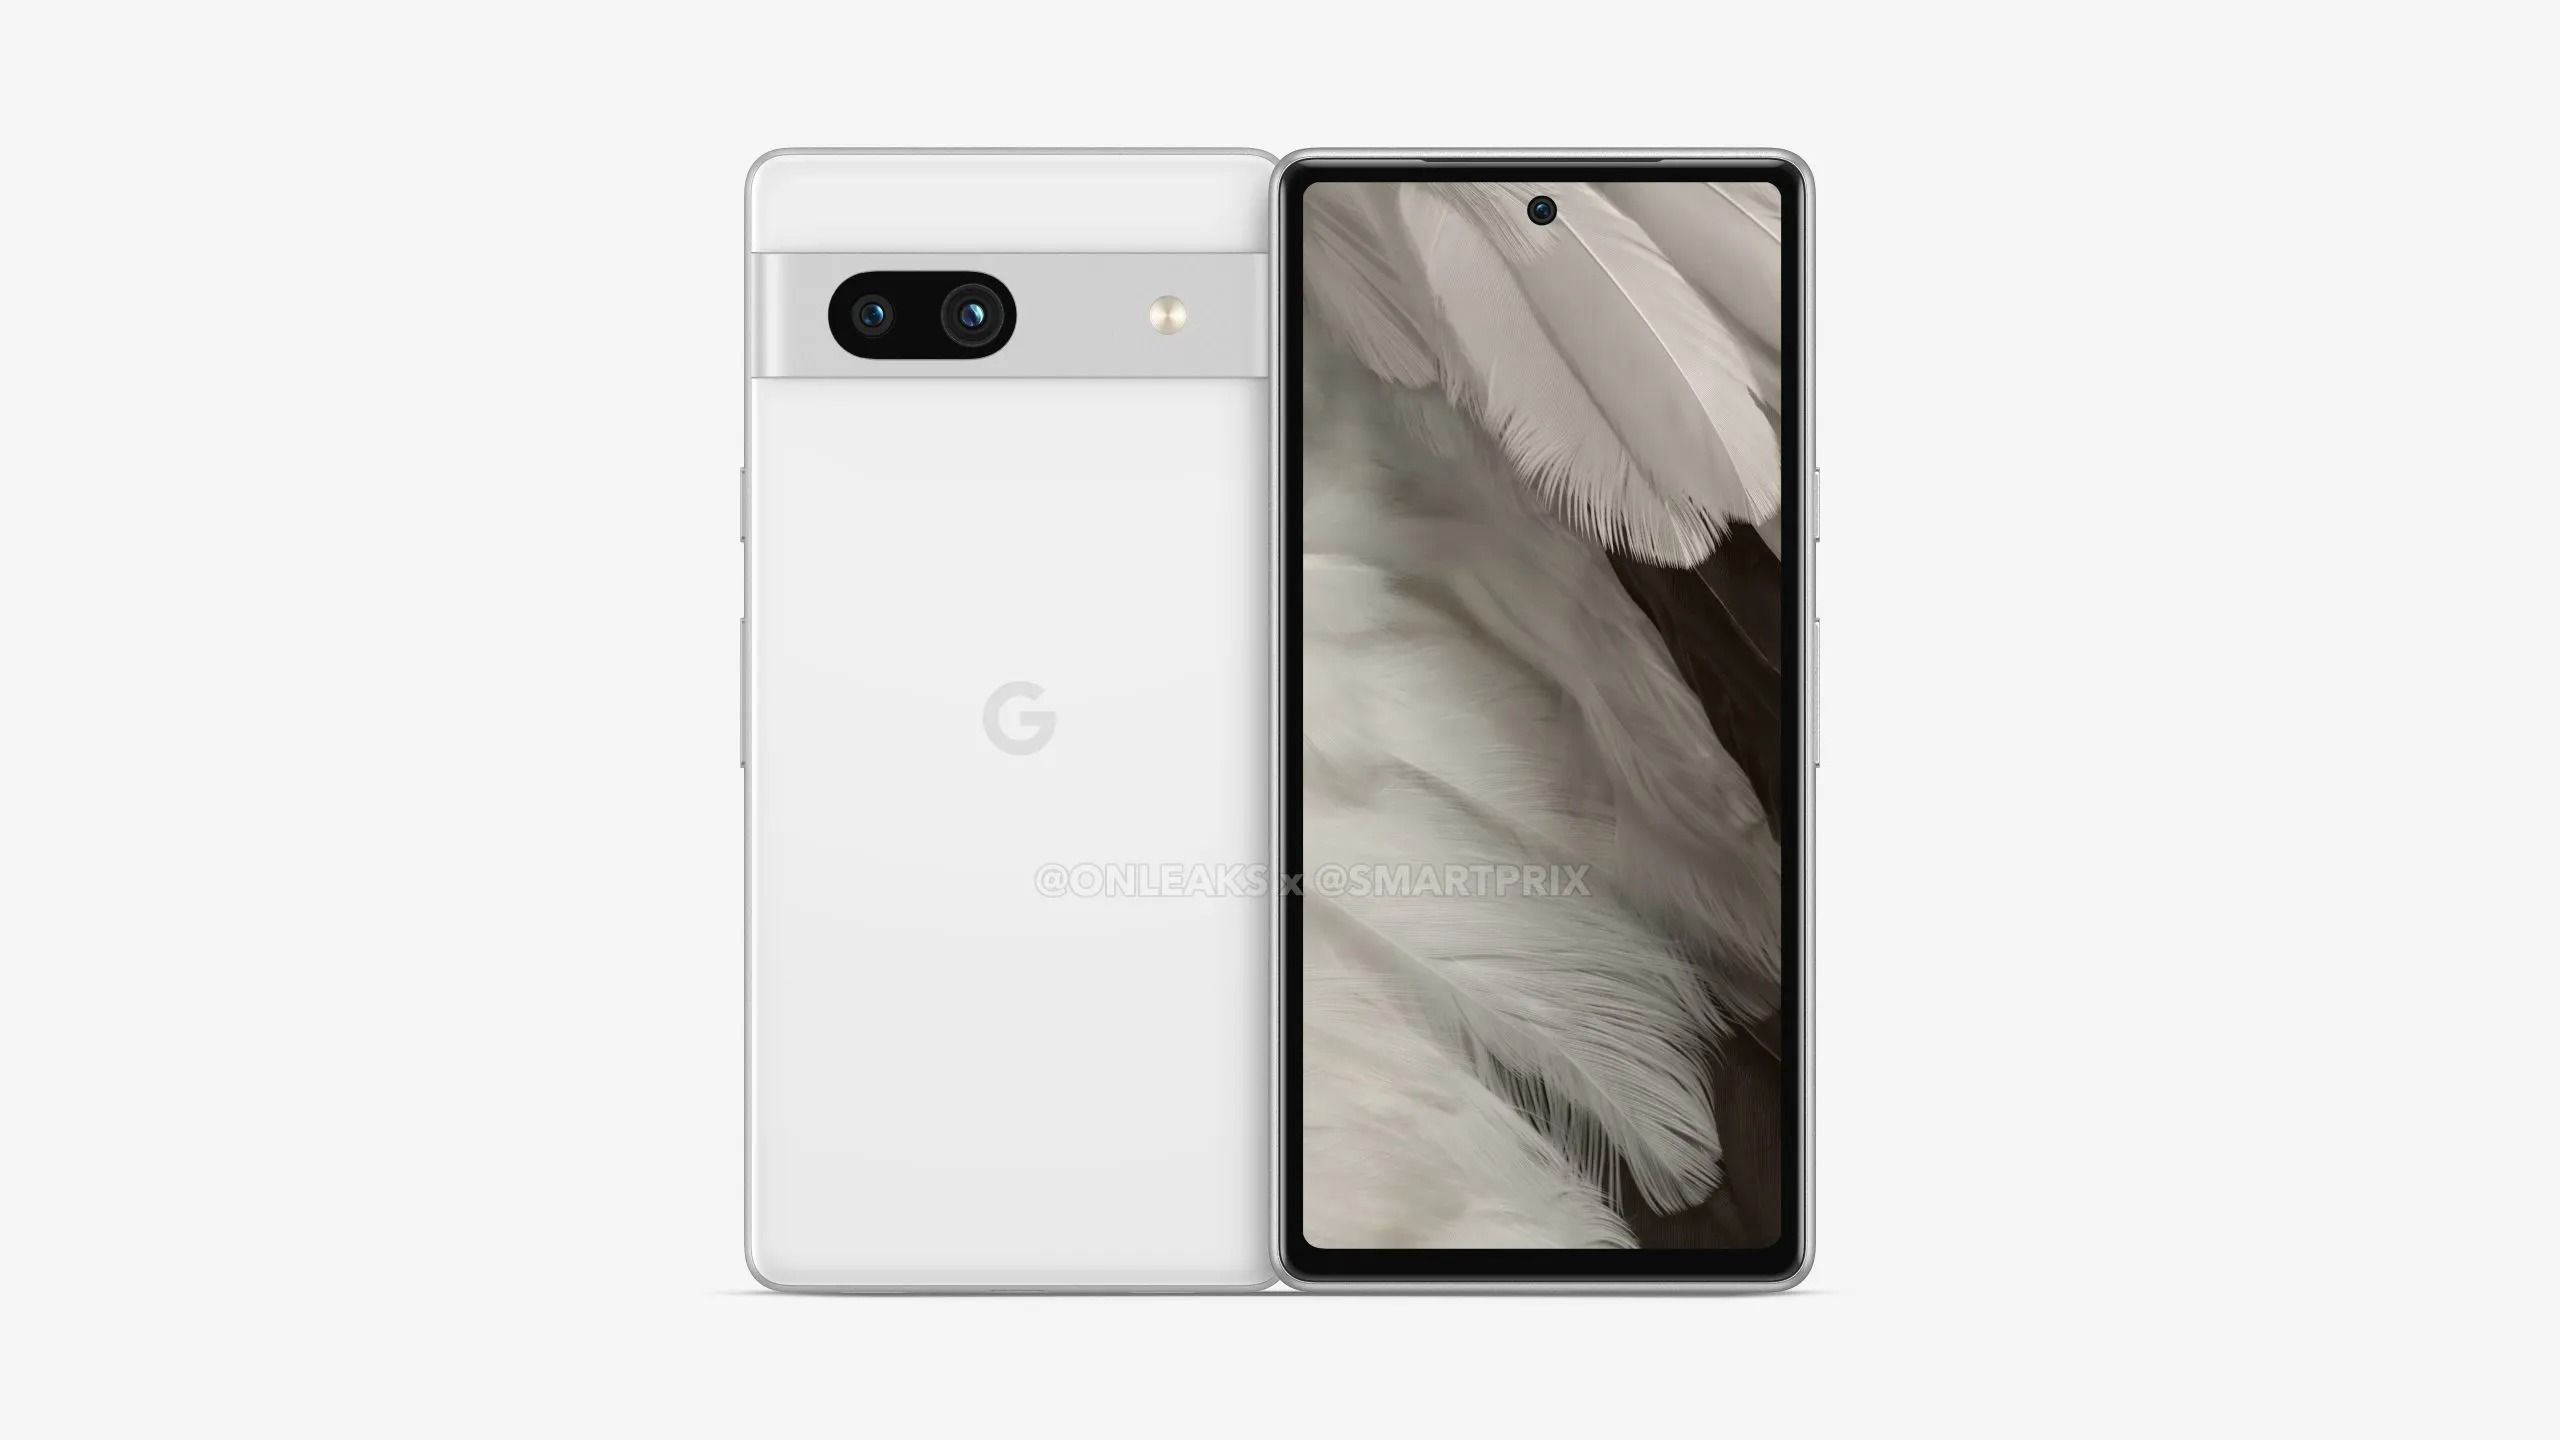  A reported render of the front and back of the Google Pixel 7a in white.